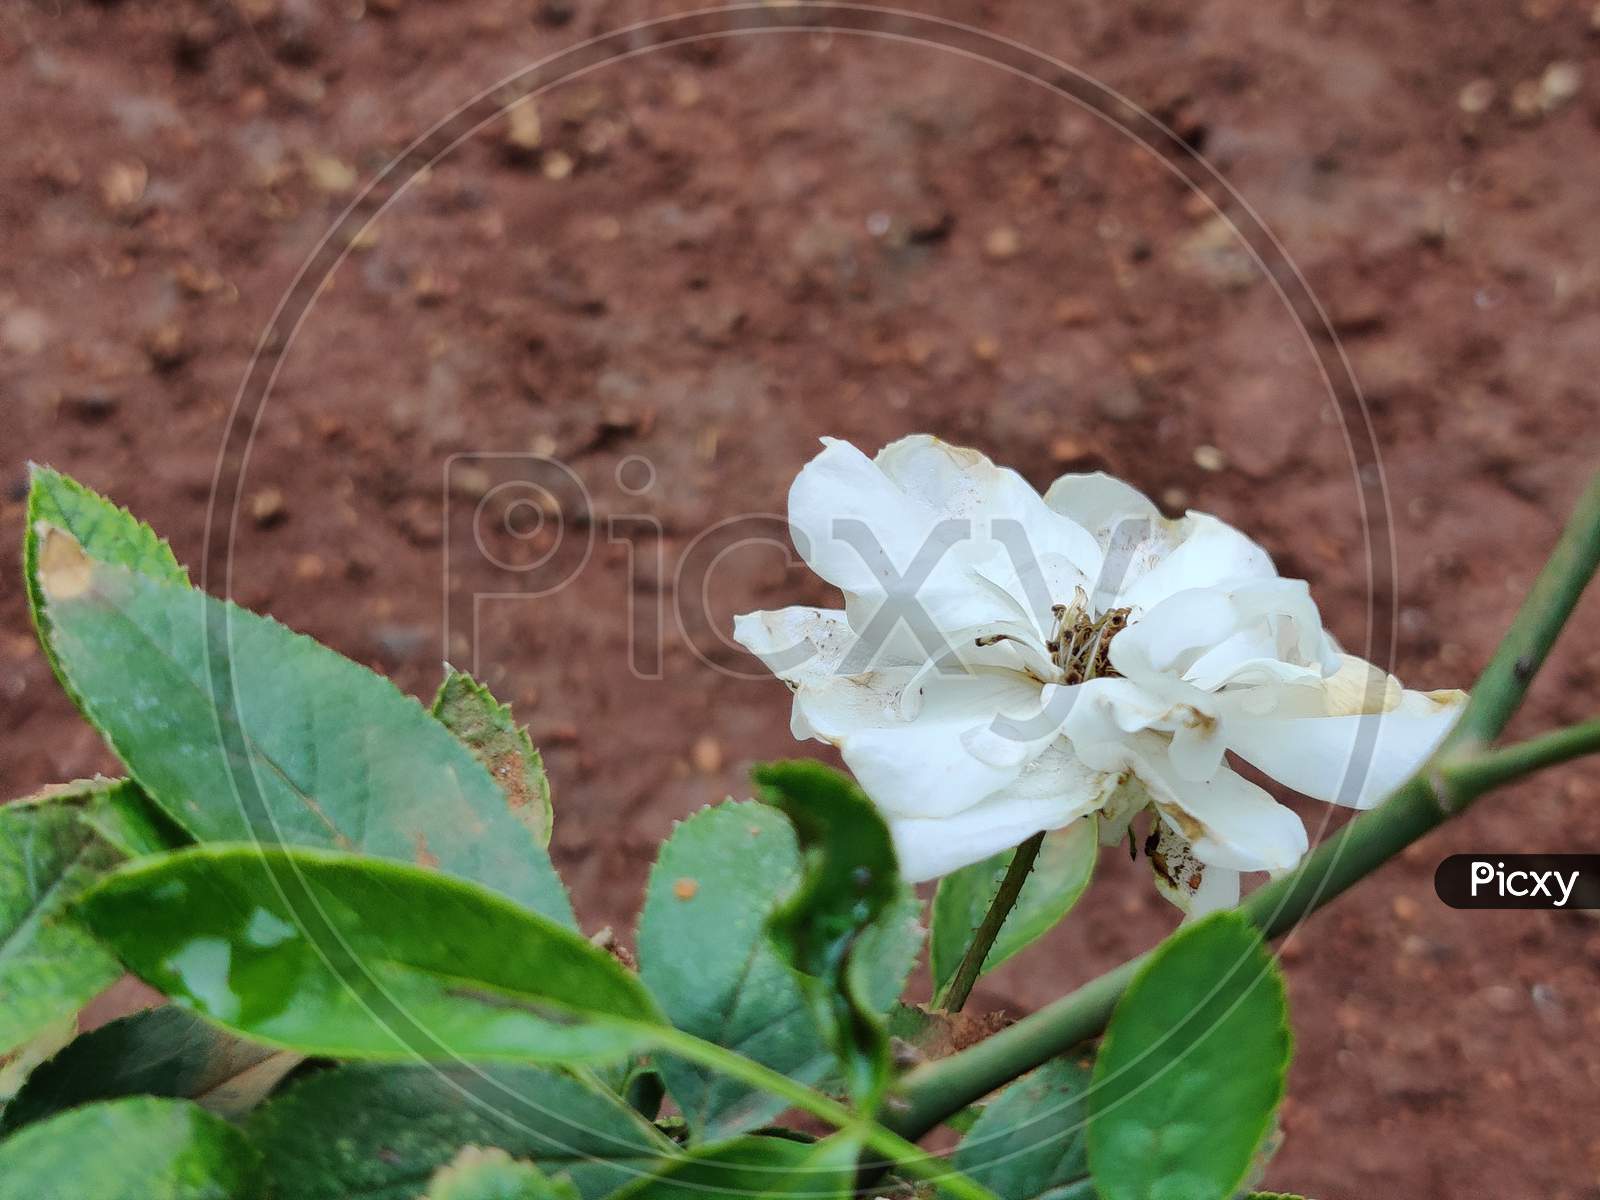 White rose in nature on green background